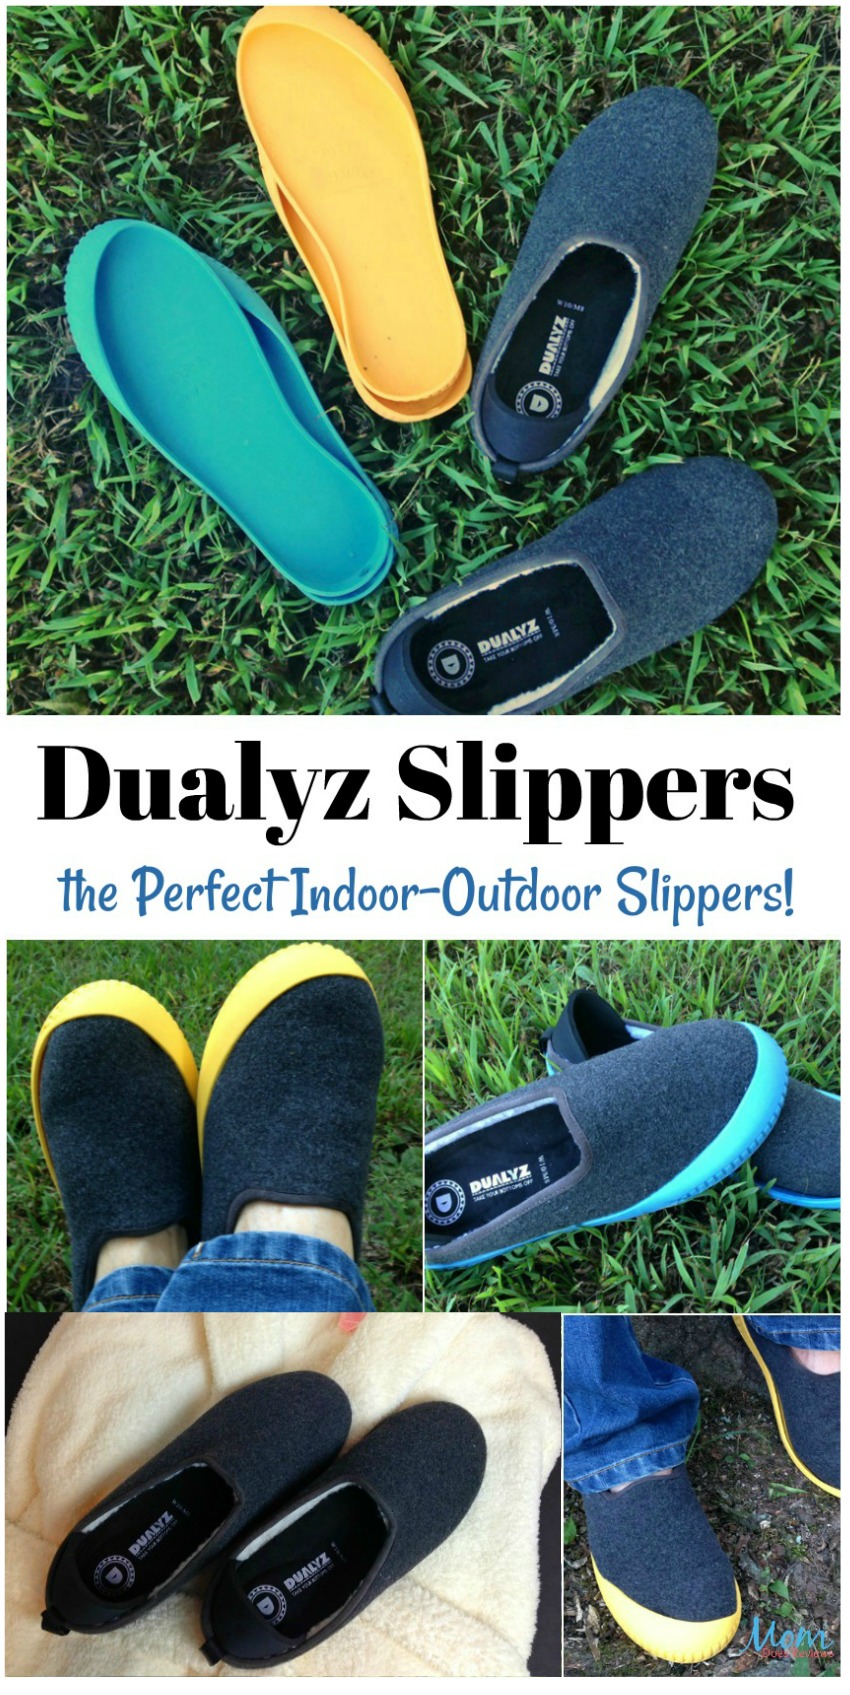 Dualyz Slippers are the Perfect Indoor-Outdoor Slipper! #takeyourbottomsoff